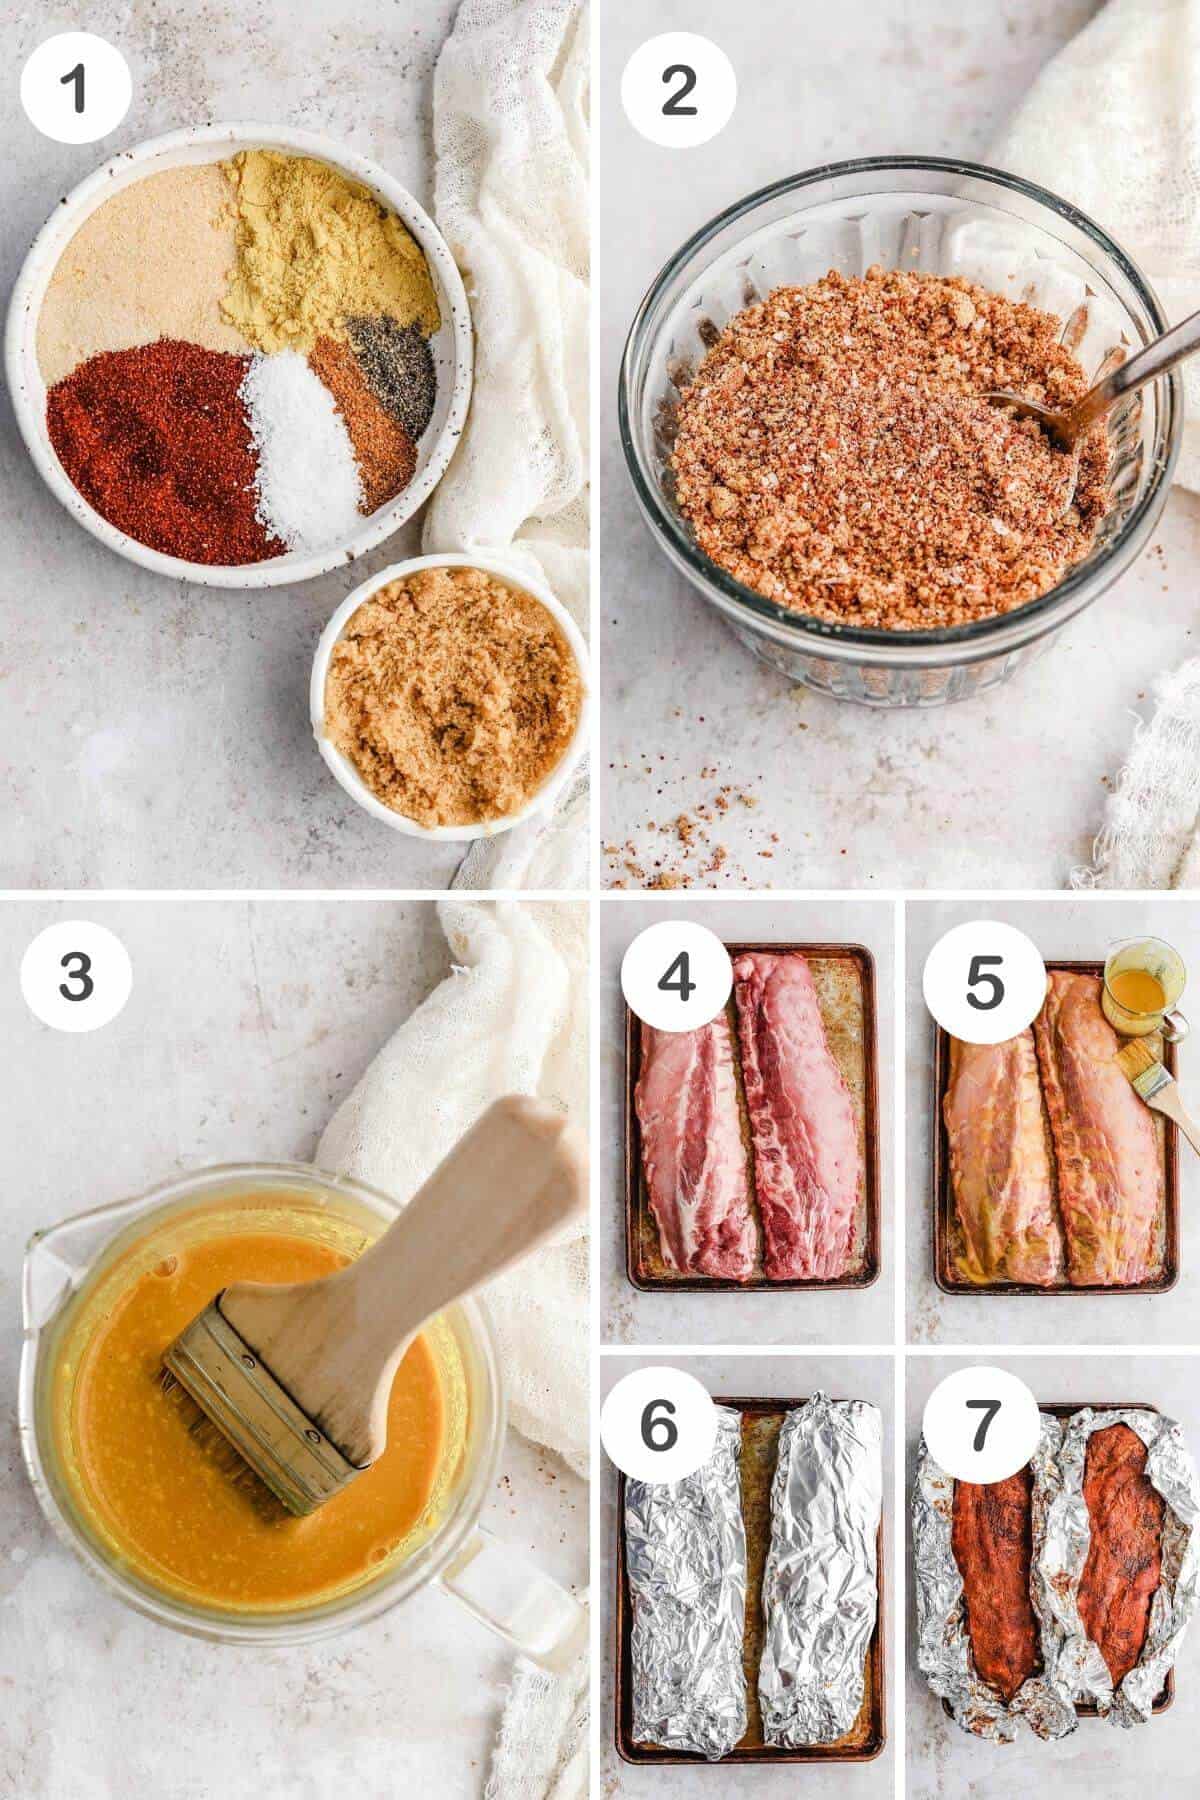 labeled step by step photos for how to make this recipe